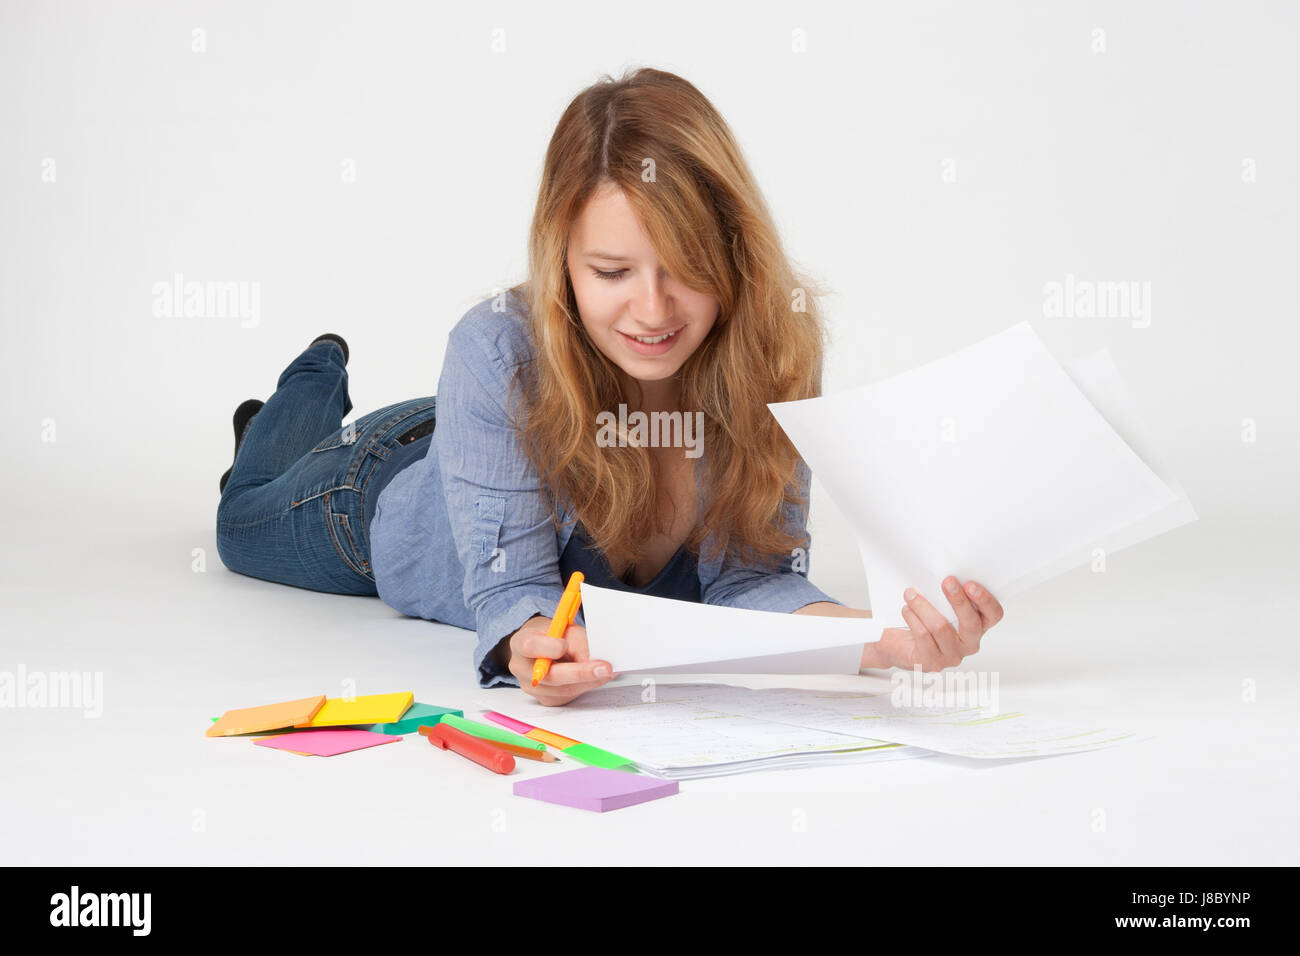 study, student, egghead, woman, blue, laugh, laughs, laughing, twit, giggle, Stock Photo